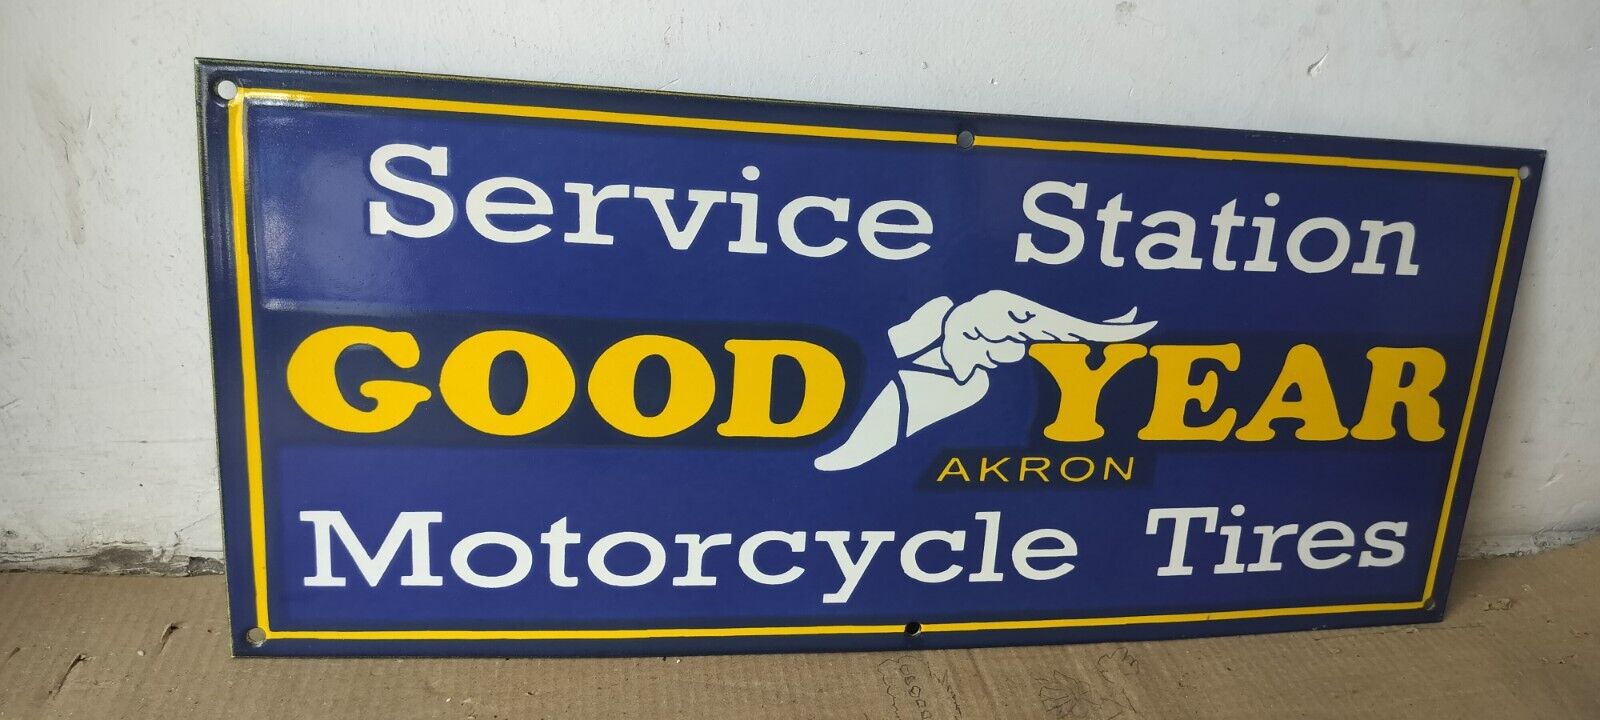 Good year Service Station Porcelain Enamel Sign  24 x 10 Inches